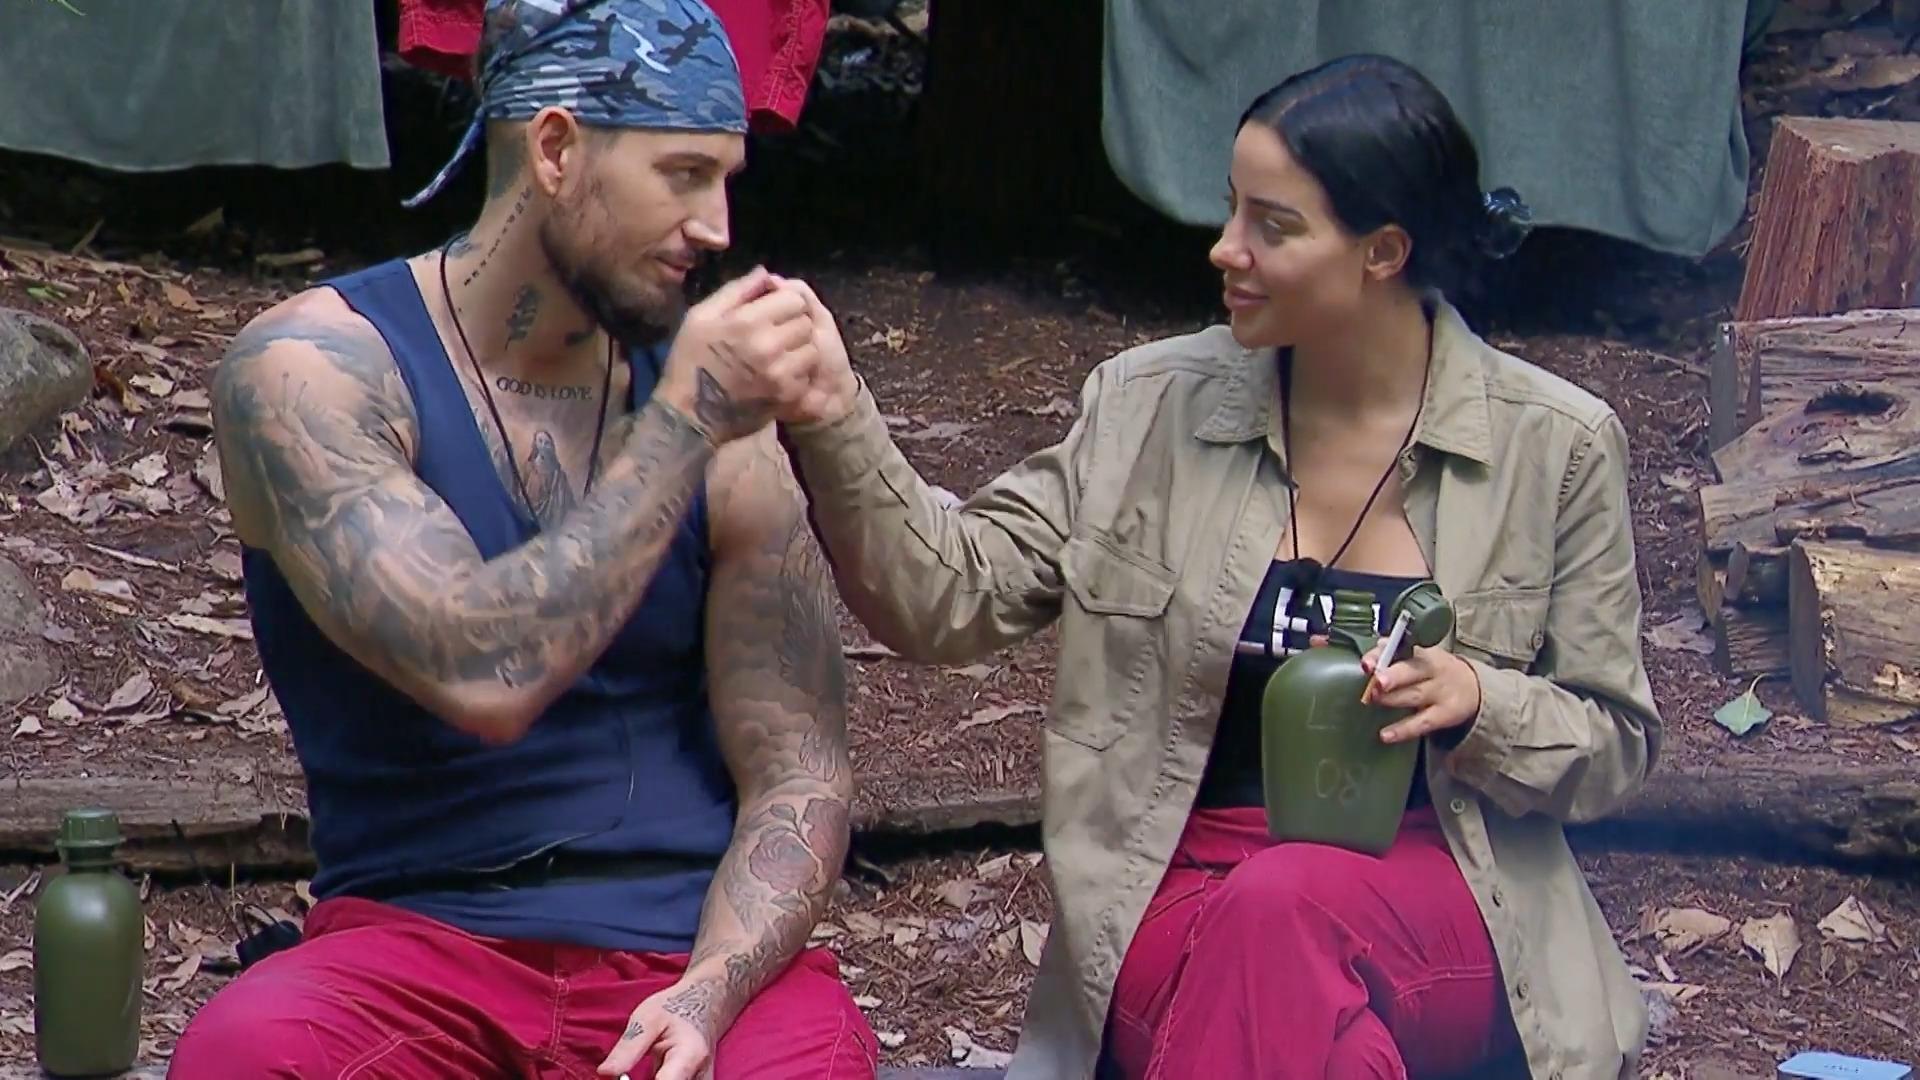 As soon as Kim Virginia is out, Leyla and Mike approach the camp in relief